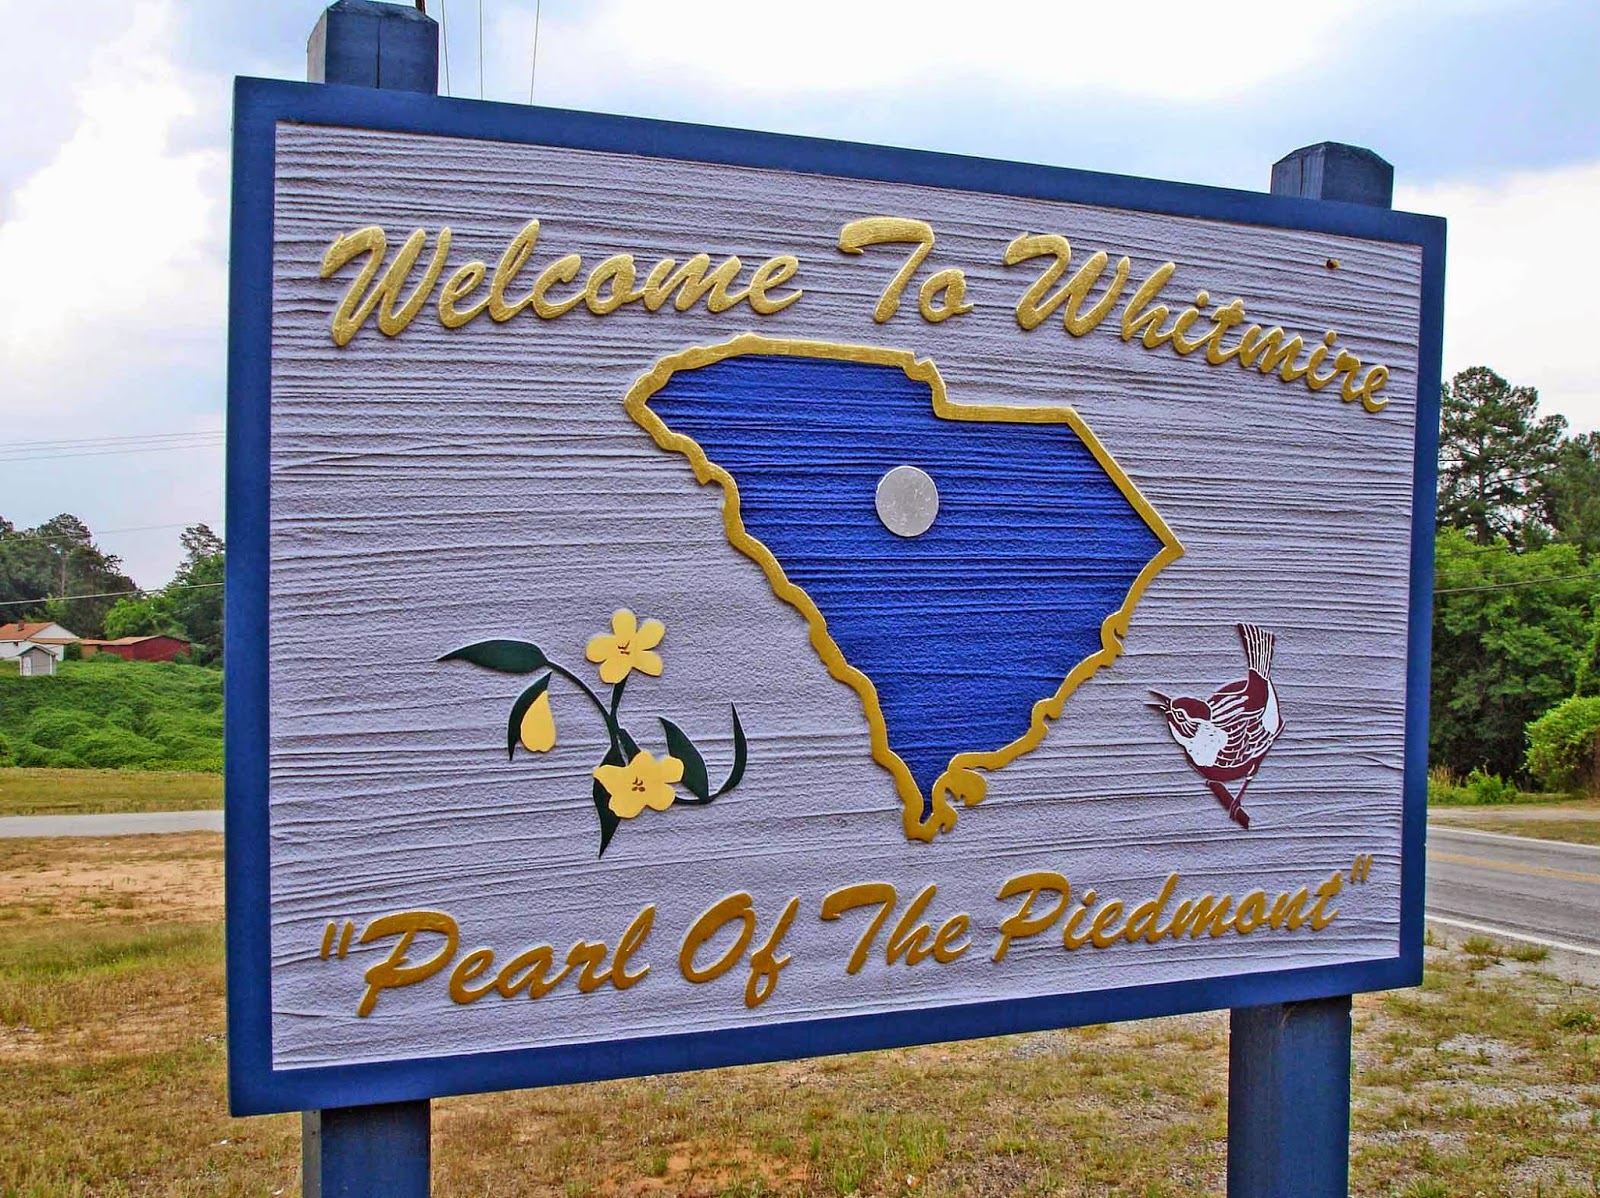 photograph of welcome to whitmire "pearl of the piedmont" sign